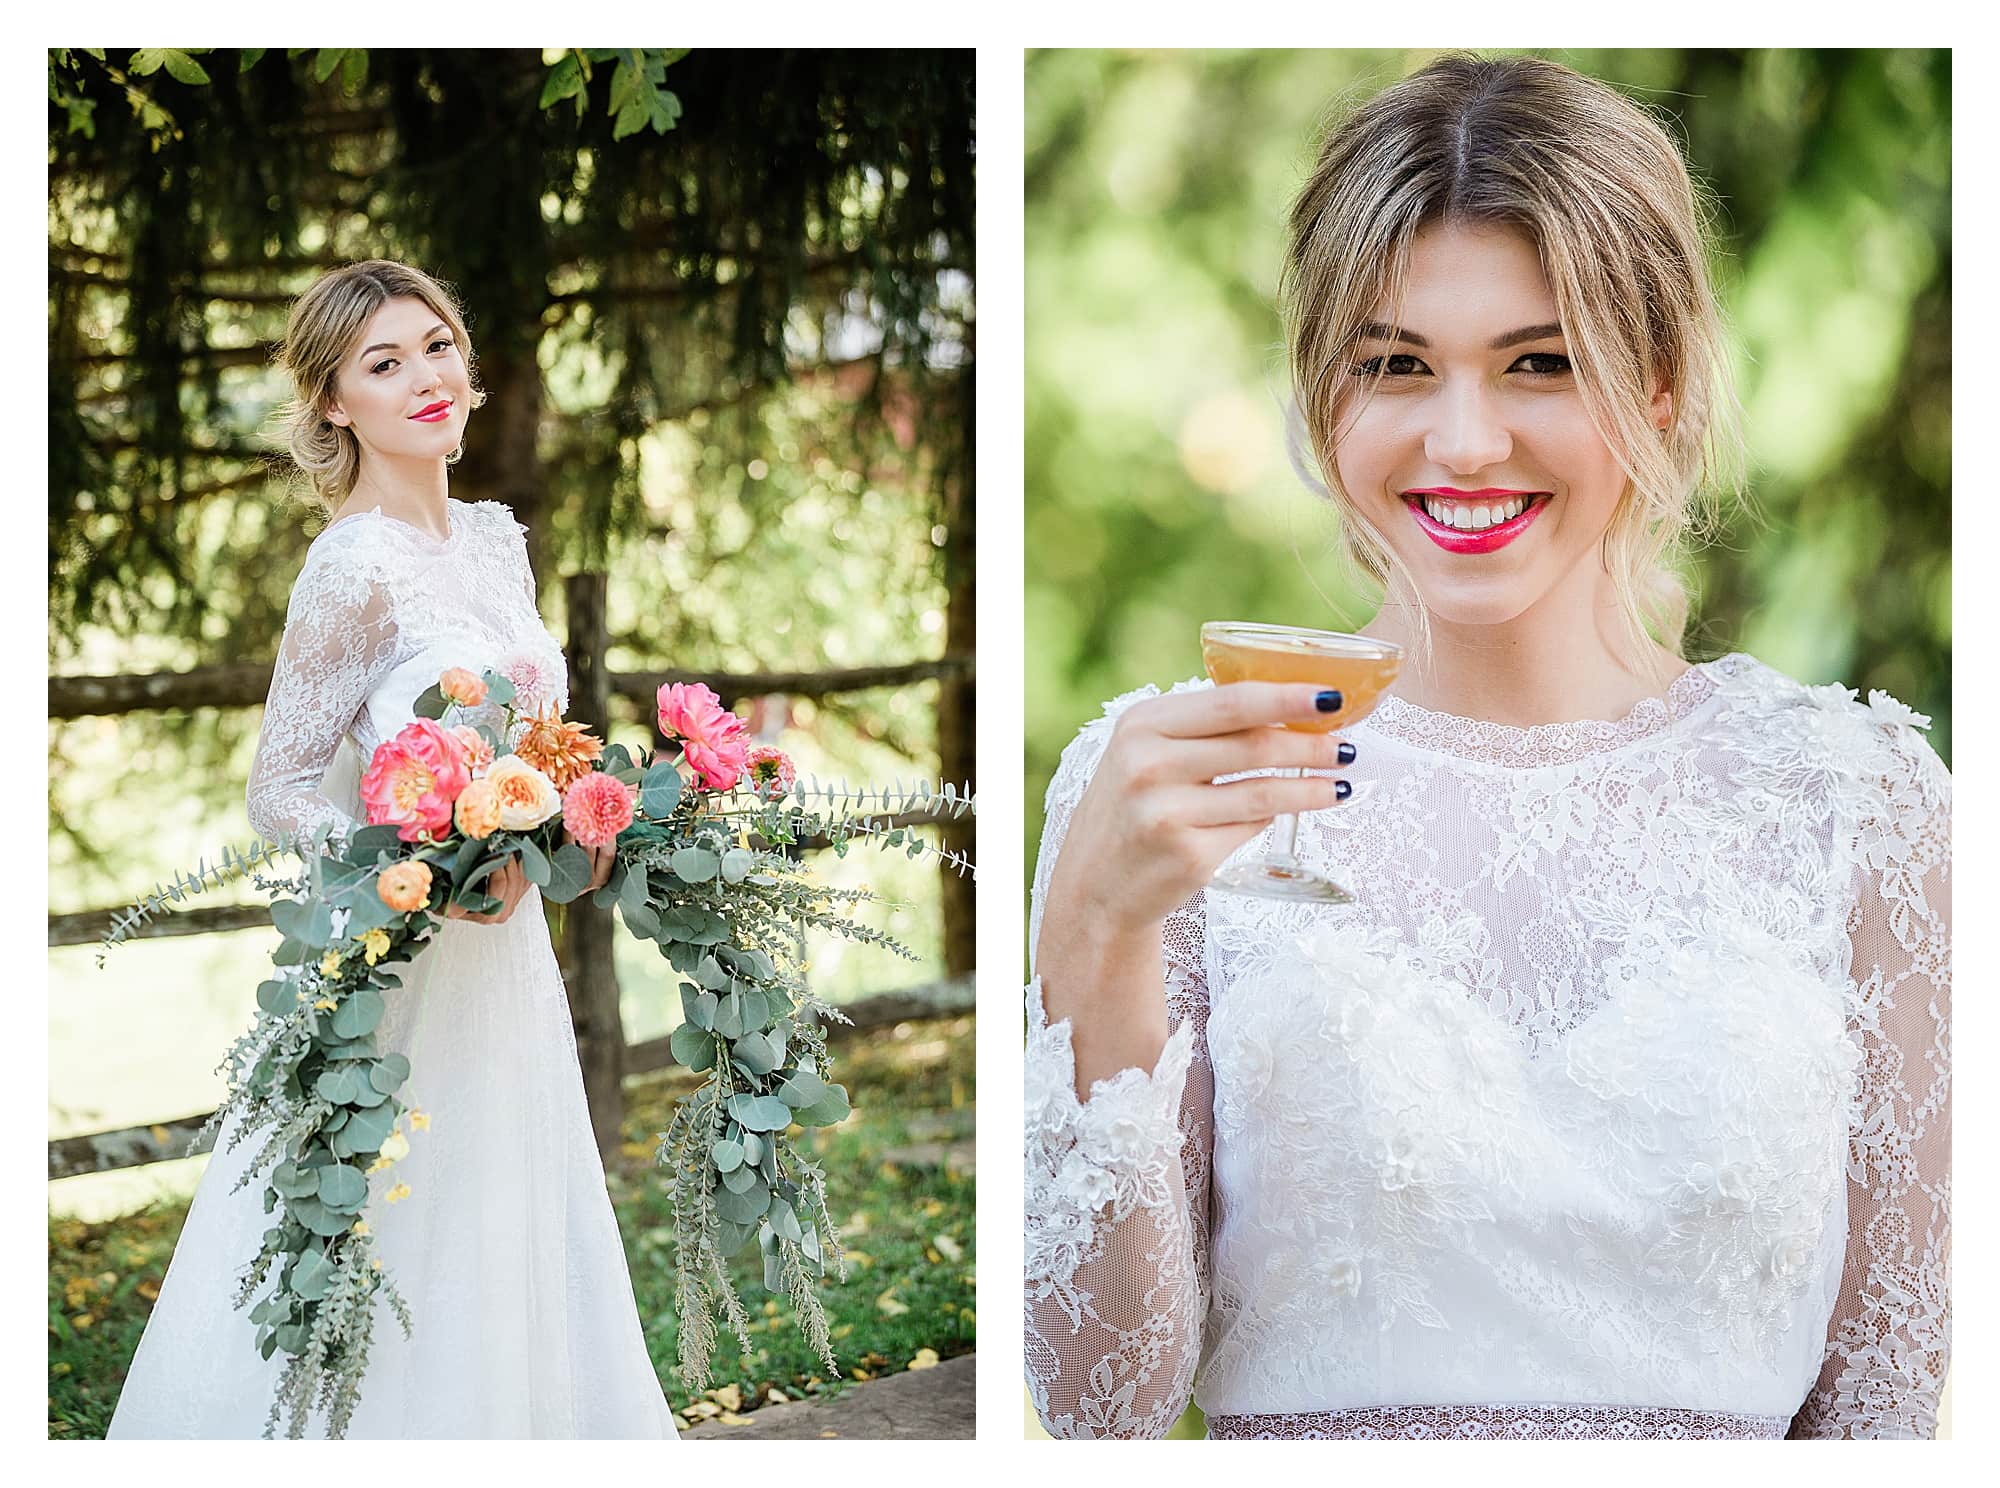 Bride wearing two piece white lace wedding dress sipping cocktail smiling